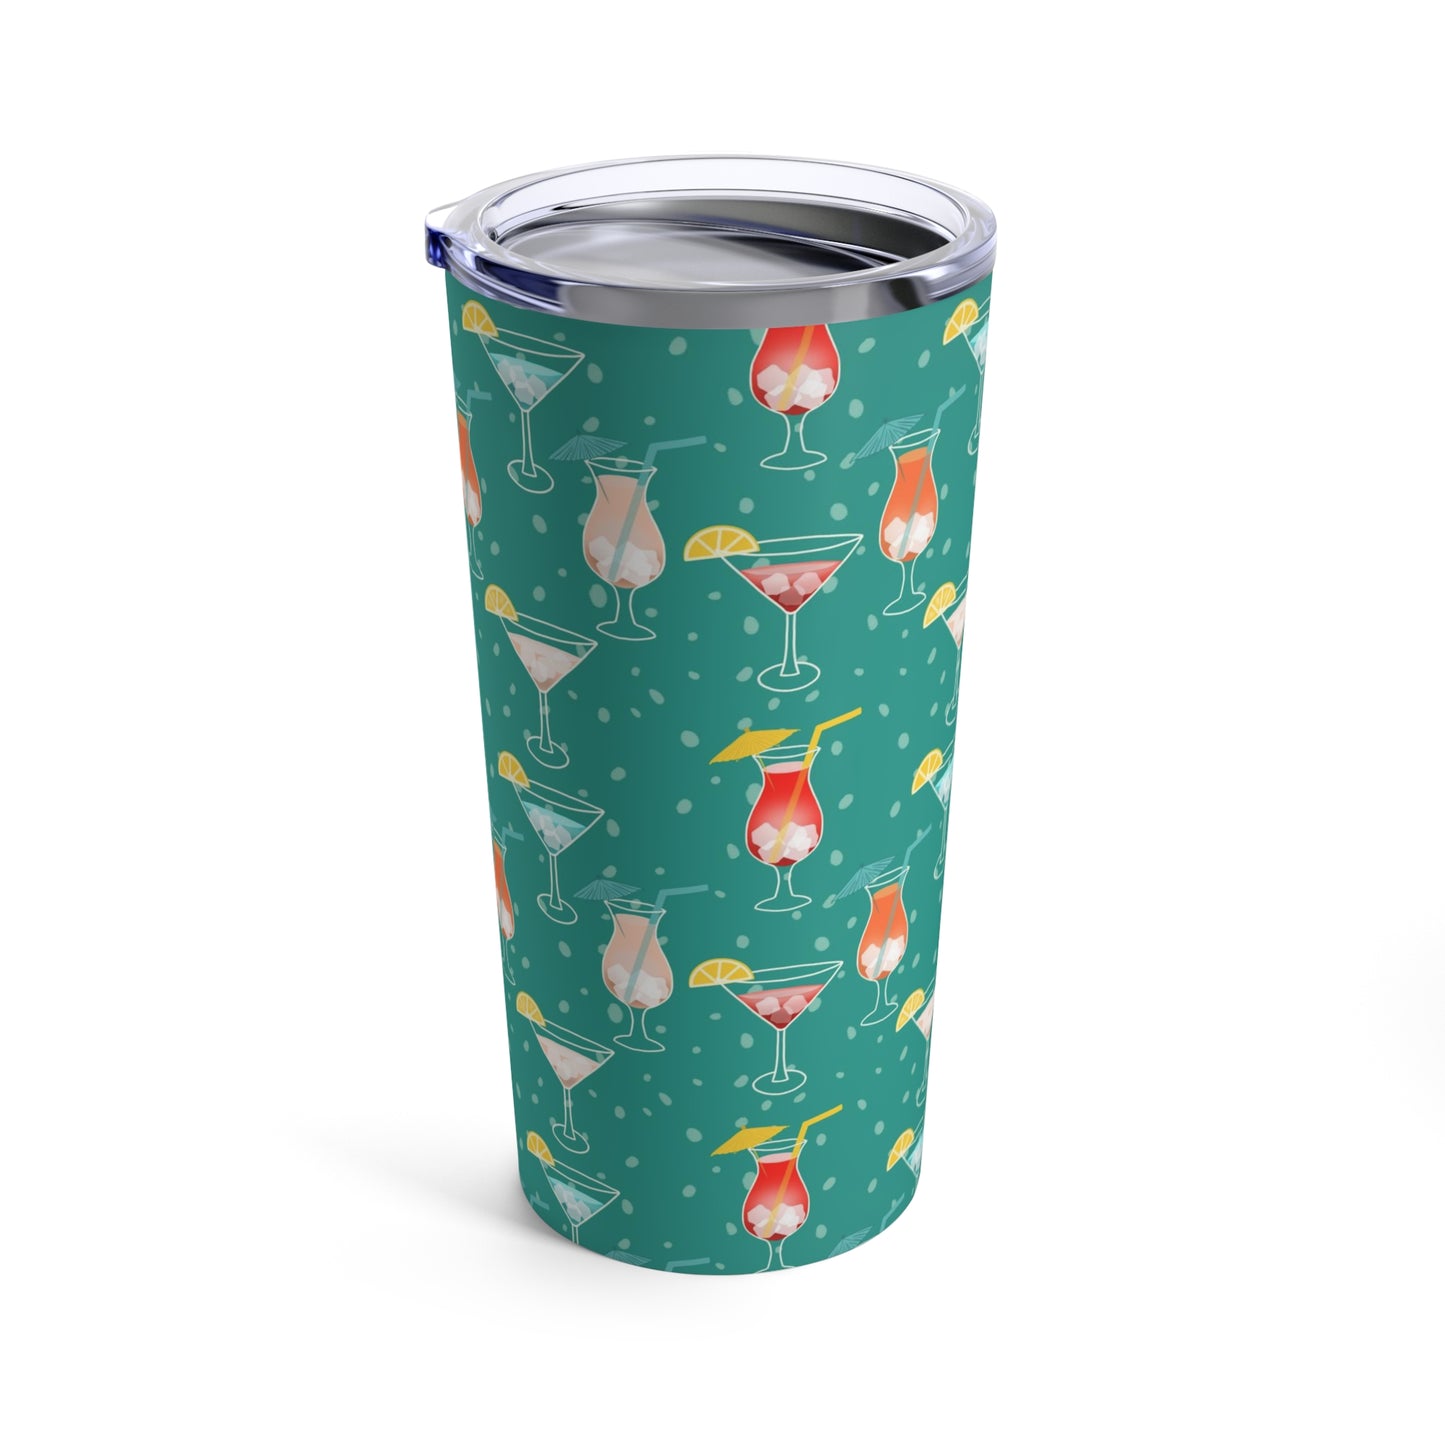 Cocktails Stainless Steel Travel Mug – Sip in Style!